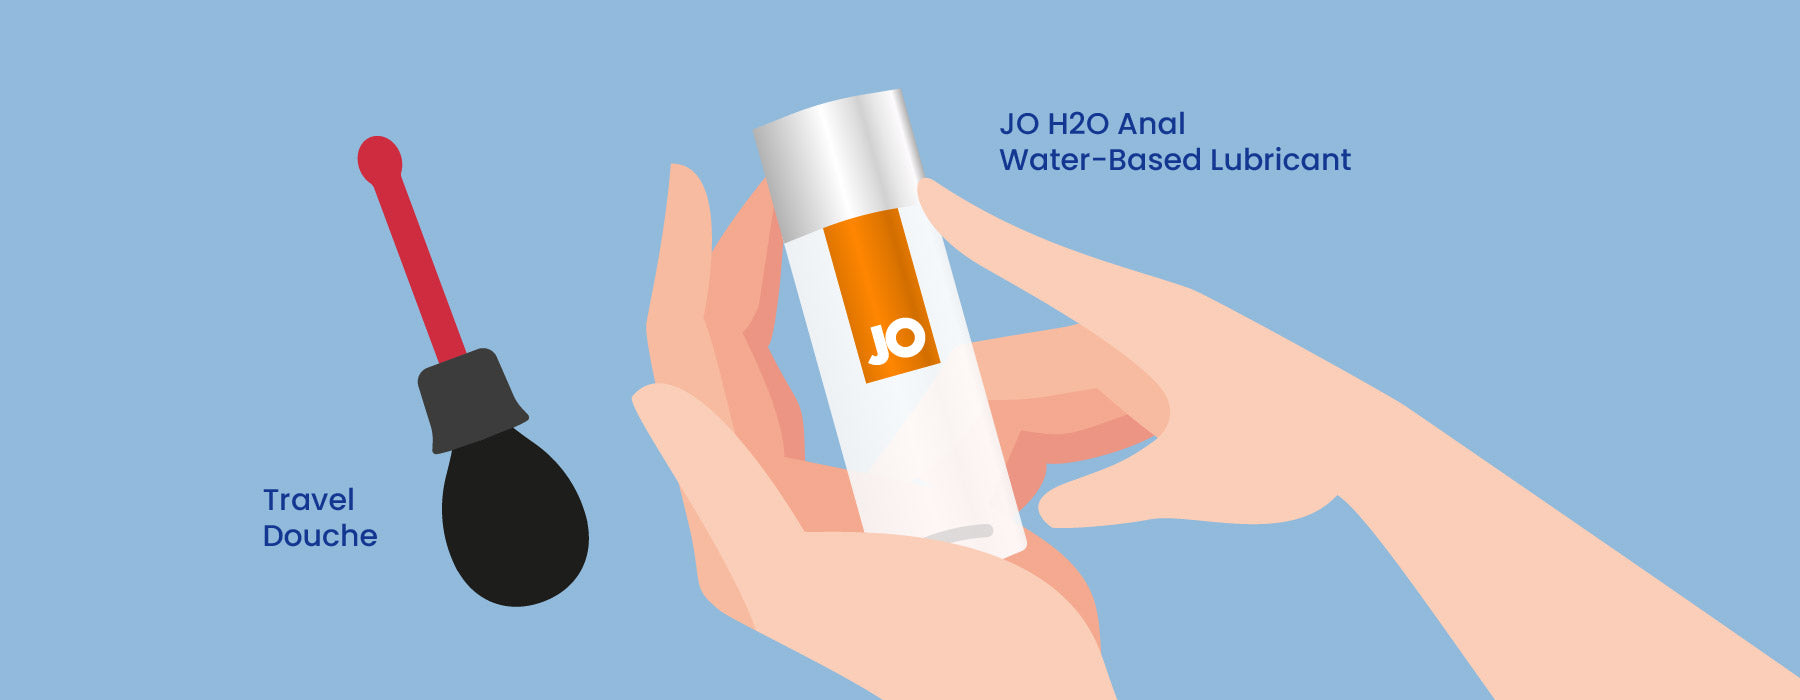 Travel Douche and JO H2O Anal Lubricant (Water-Based)